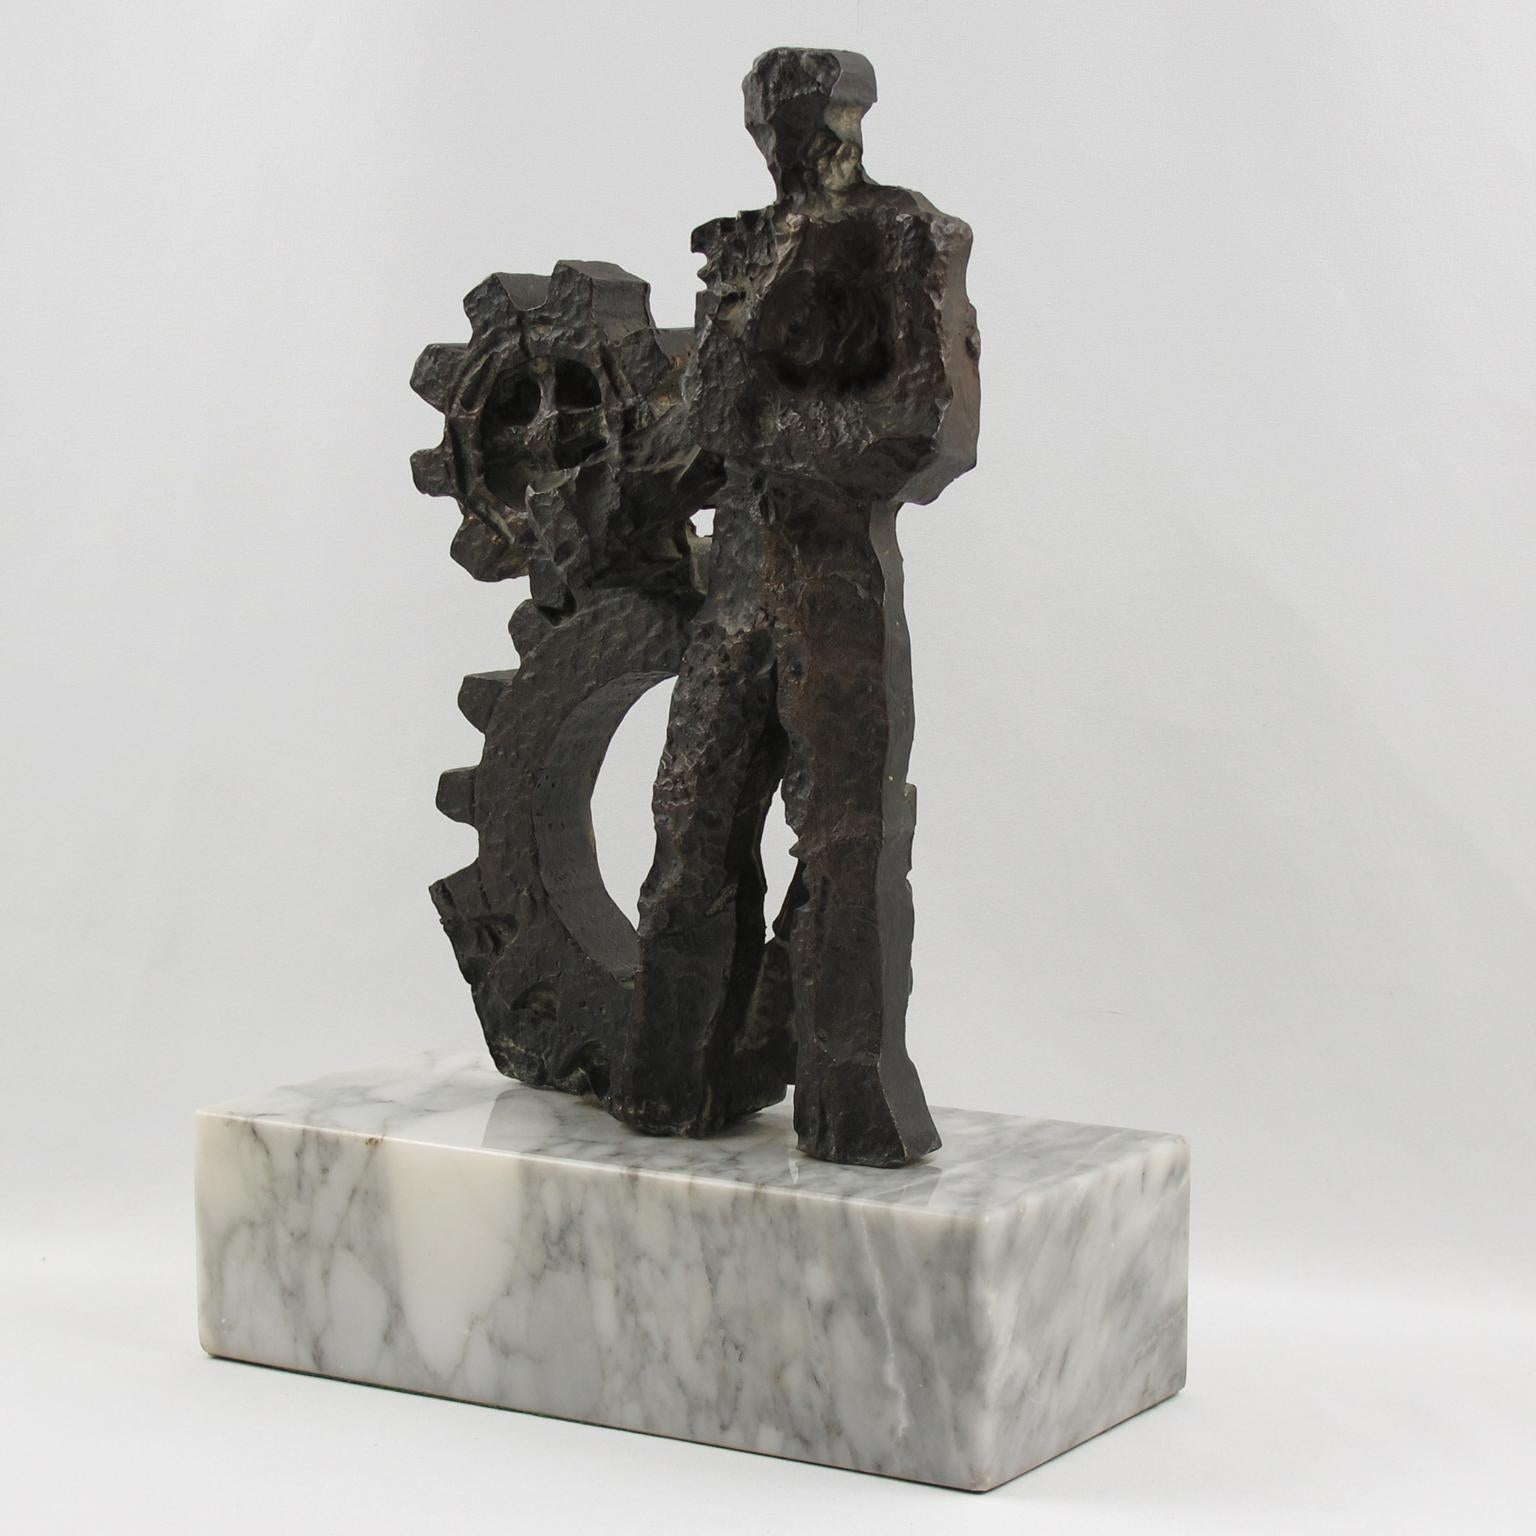 French Brutalist Bronze Sculpture on Marble Base, Man and Machine, 1970s For Sale